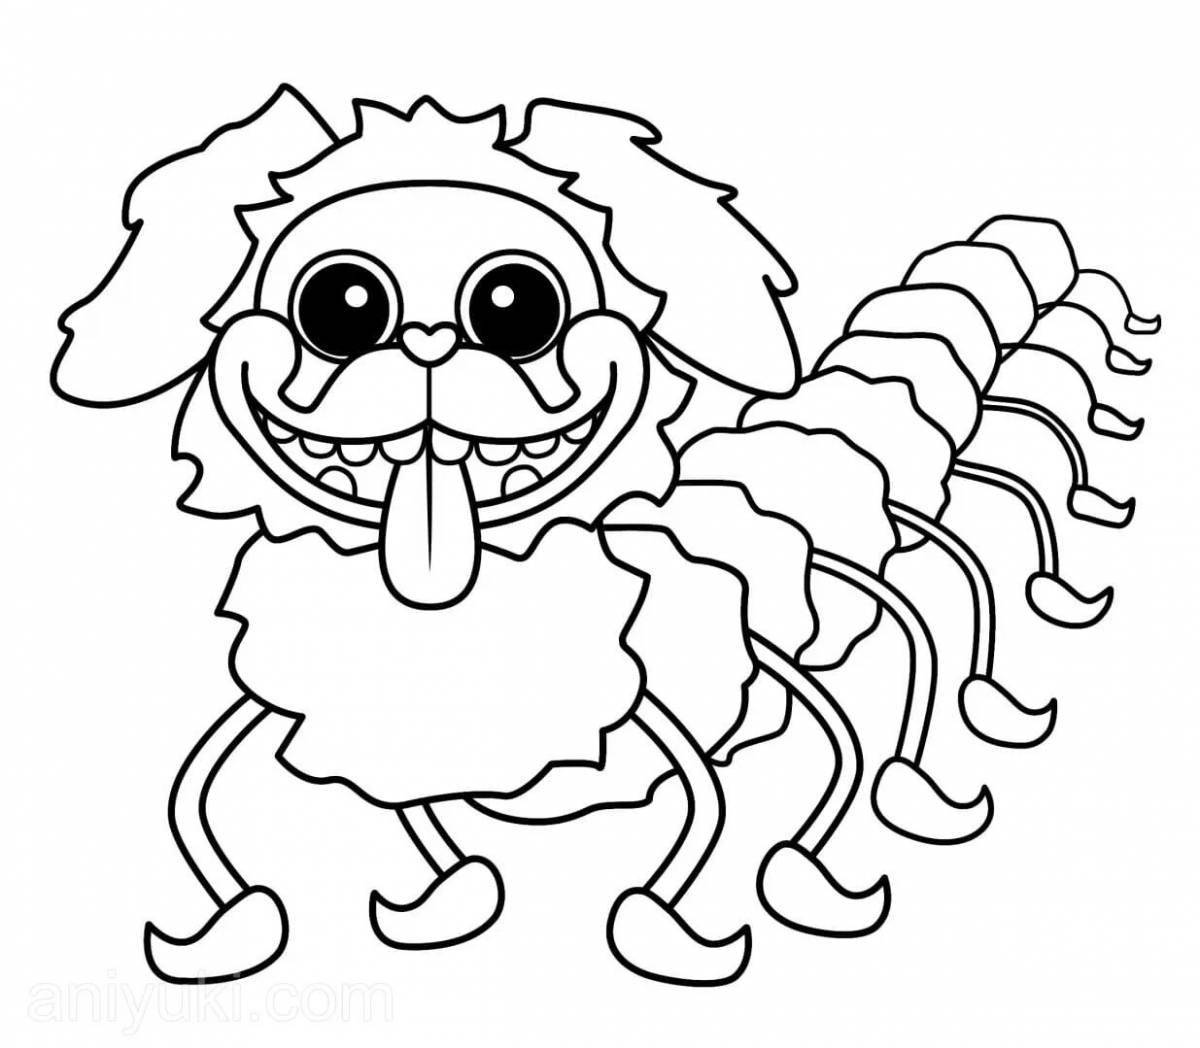 Animated pj caterpillar coloring page